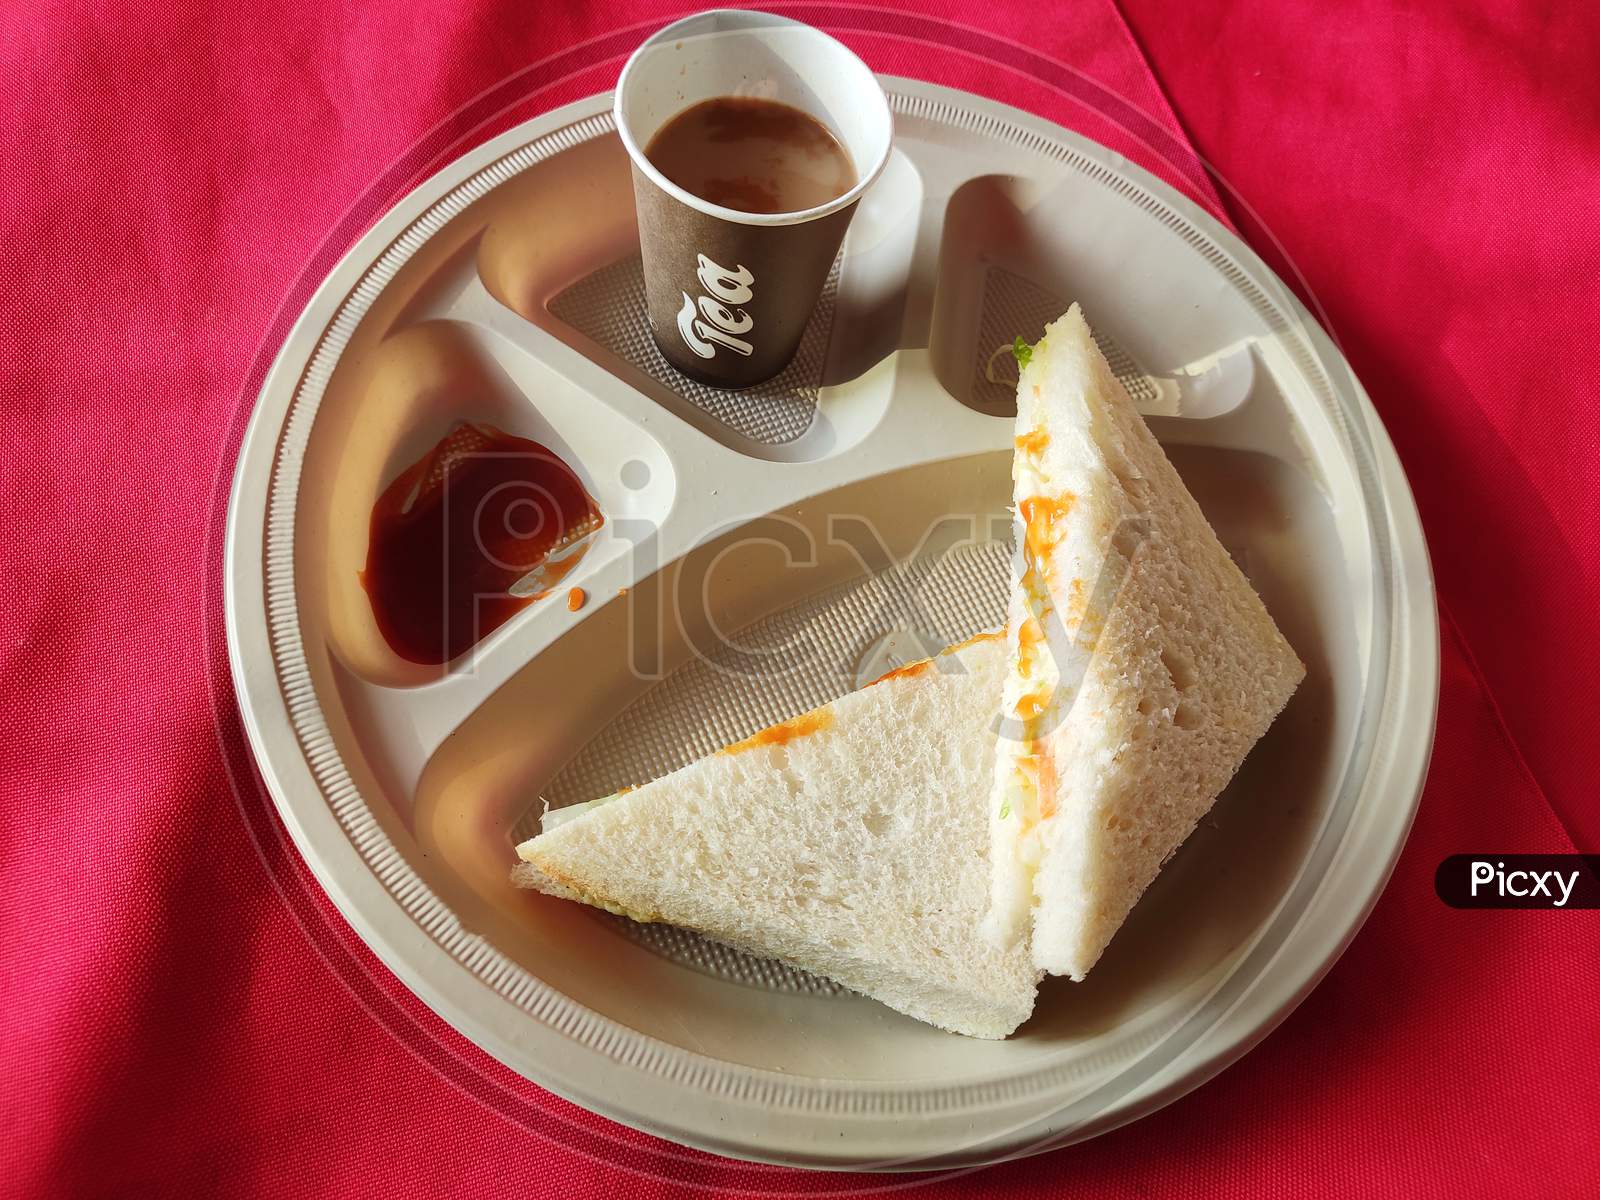 Sandwiches with tomato sauce and a cup of tea in the plate in breakfast